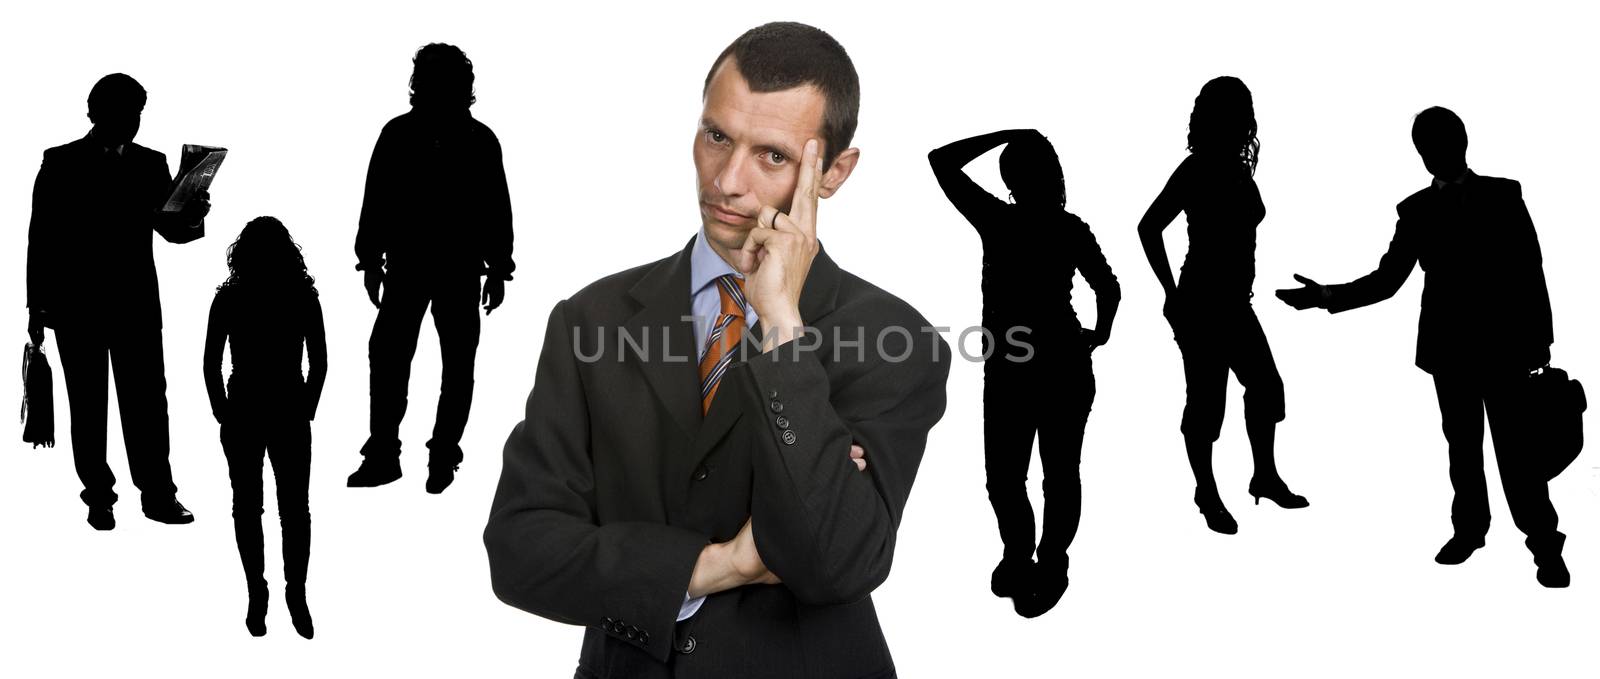 young business man portrait with people silhouettes